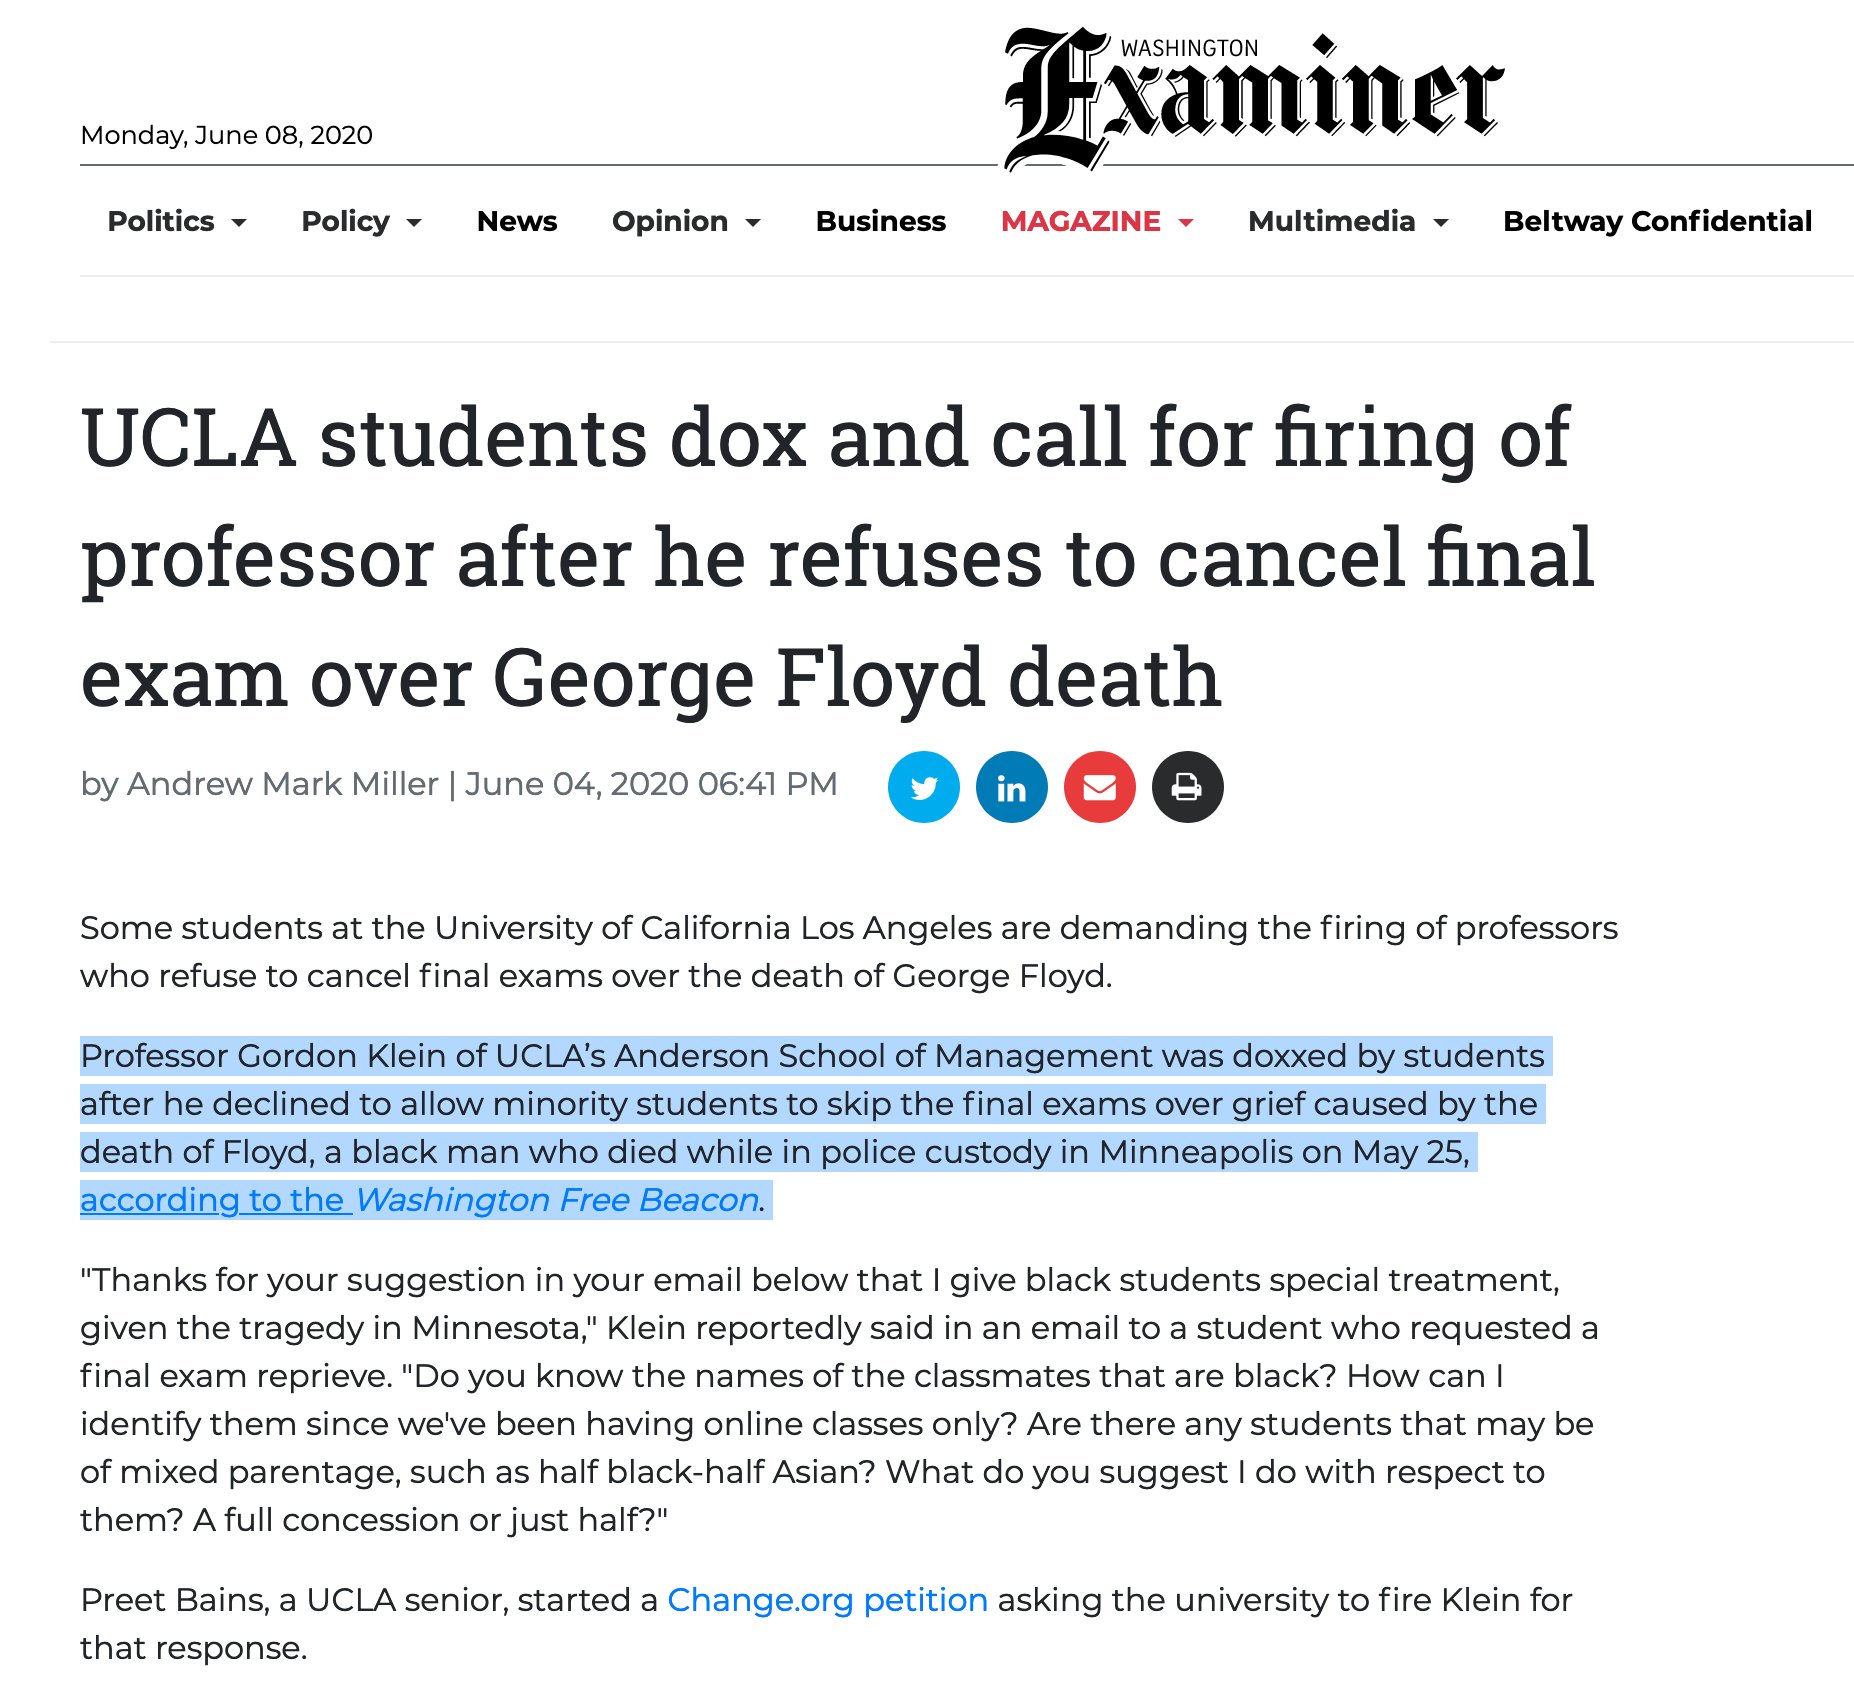 UCLA students demand professor firing over no cancellation of exams